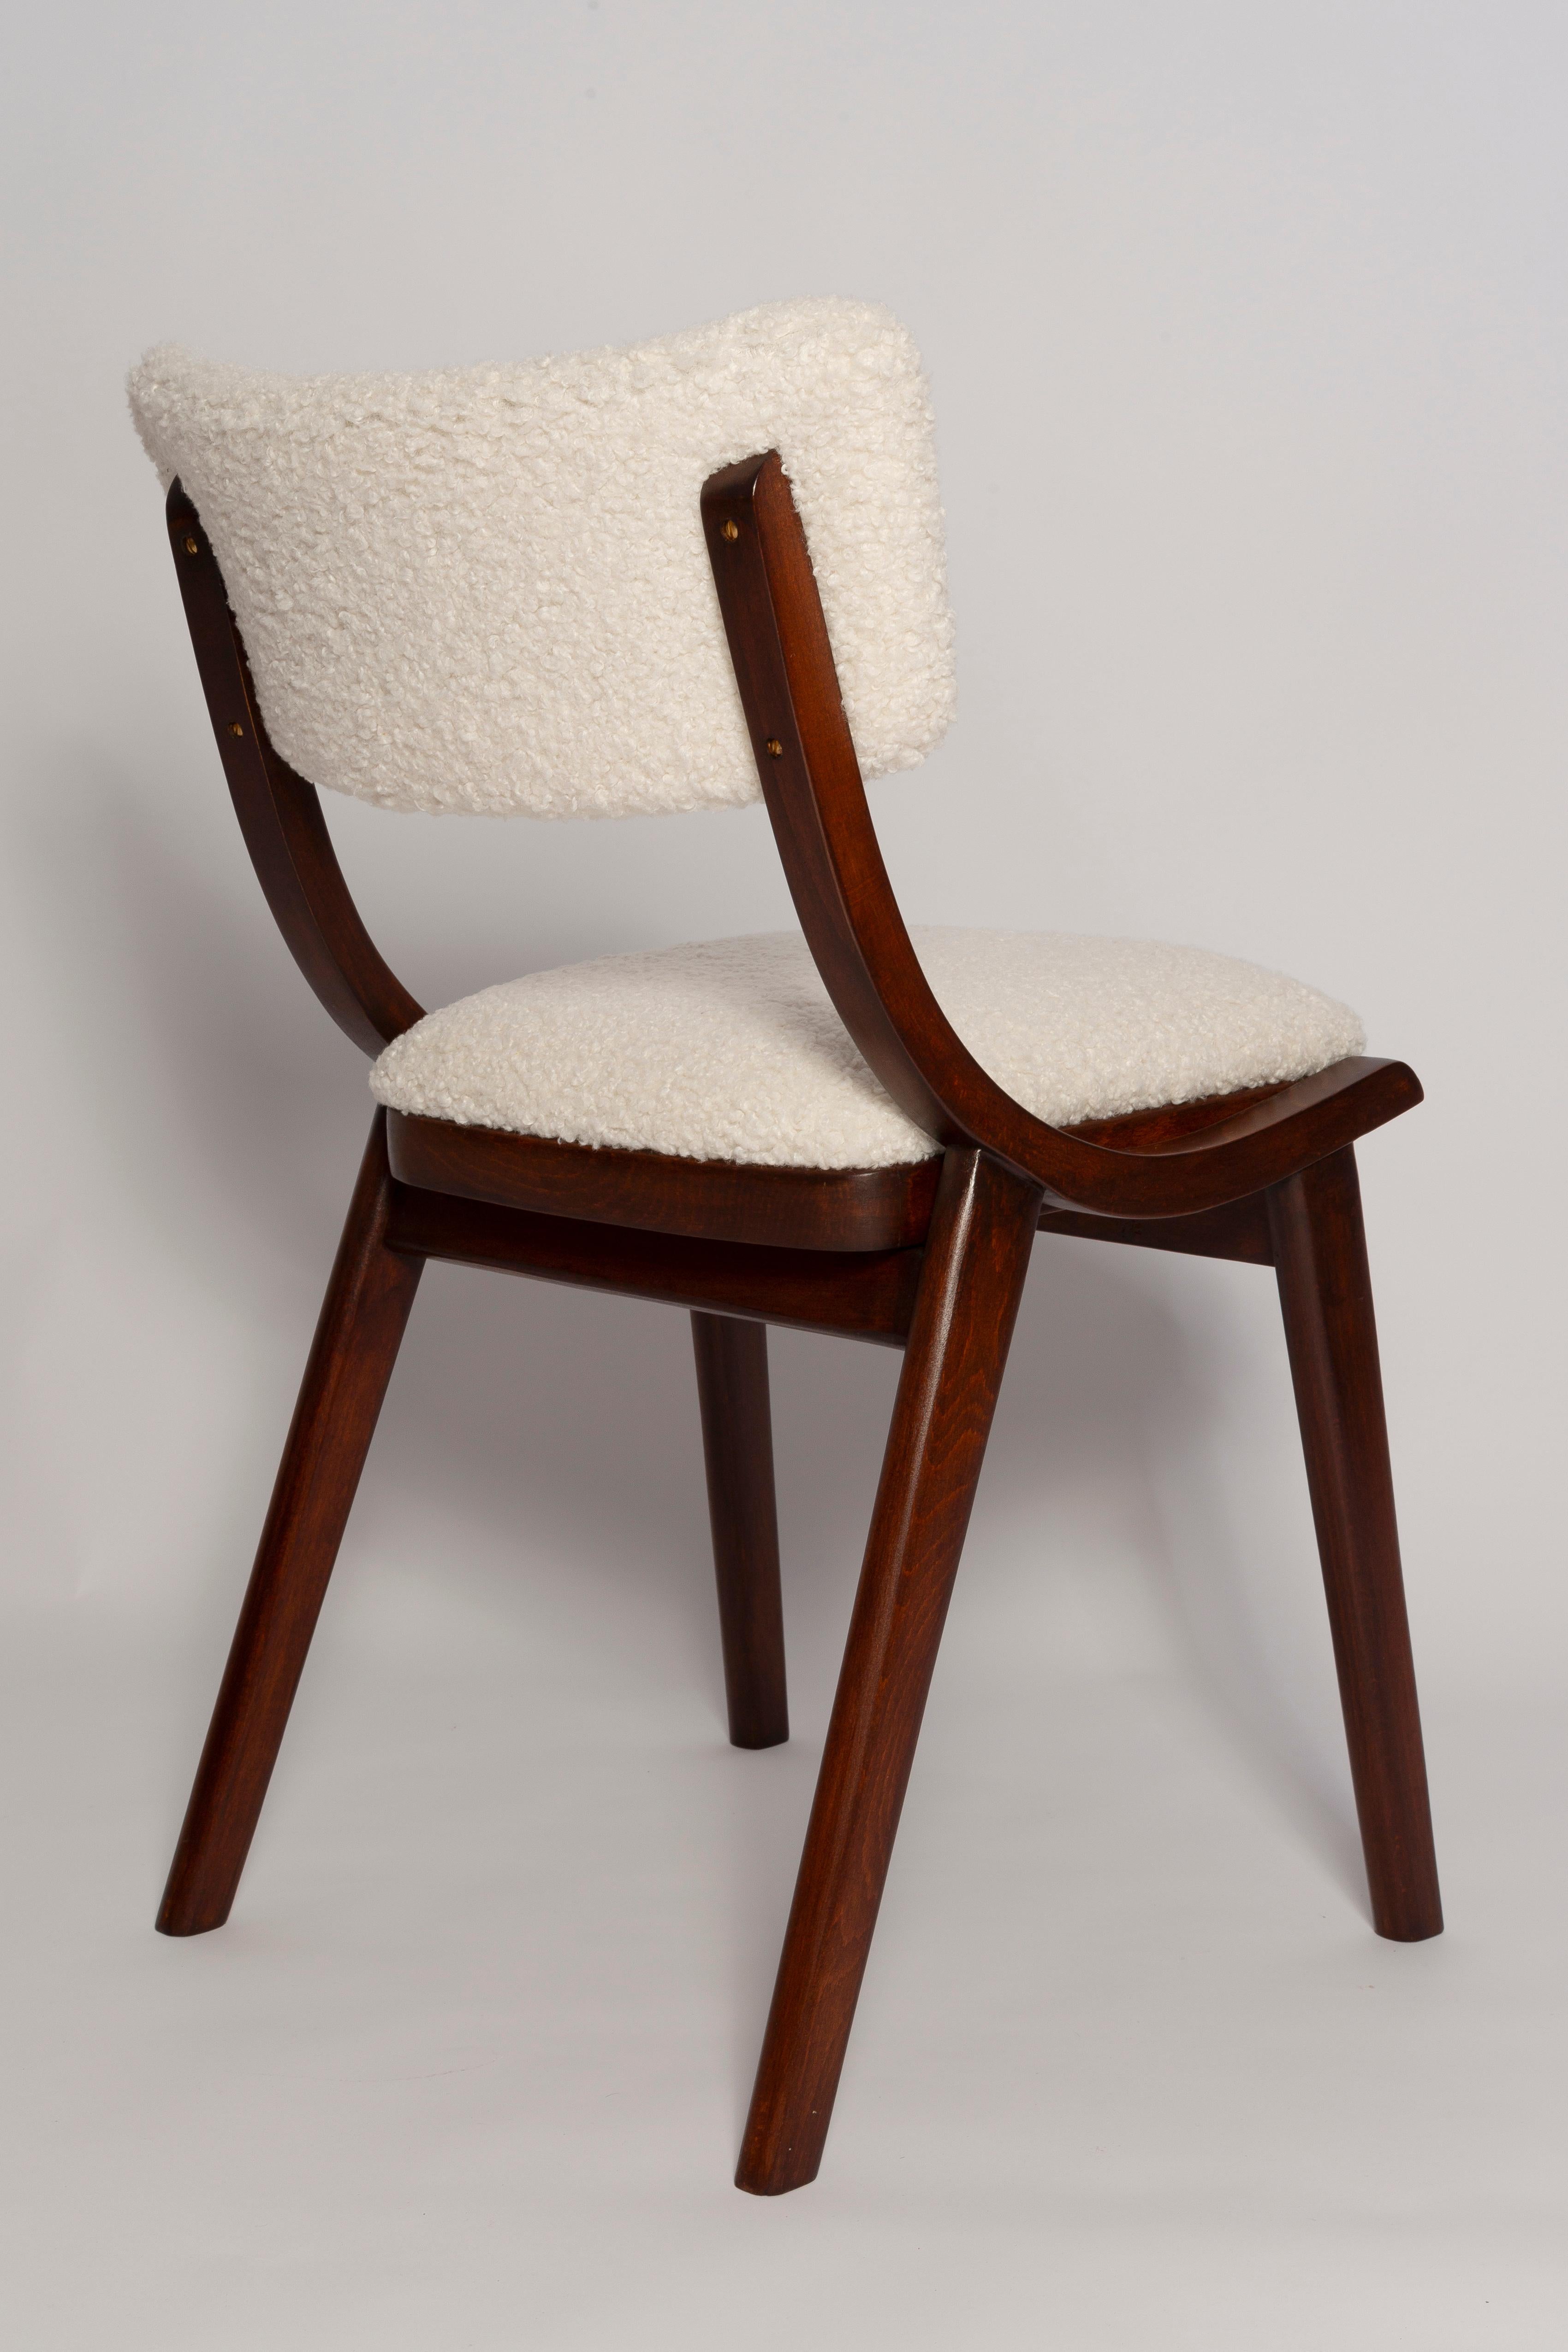 Hand-Crafted Mid Century Modern Bumerang Chair, Light Creme White Boucle, Poland, 1960s For Sale